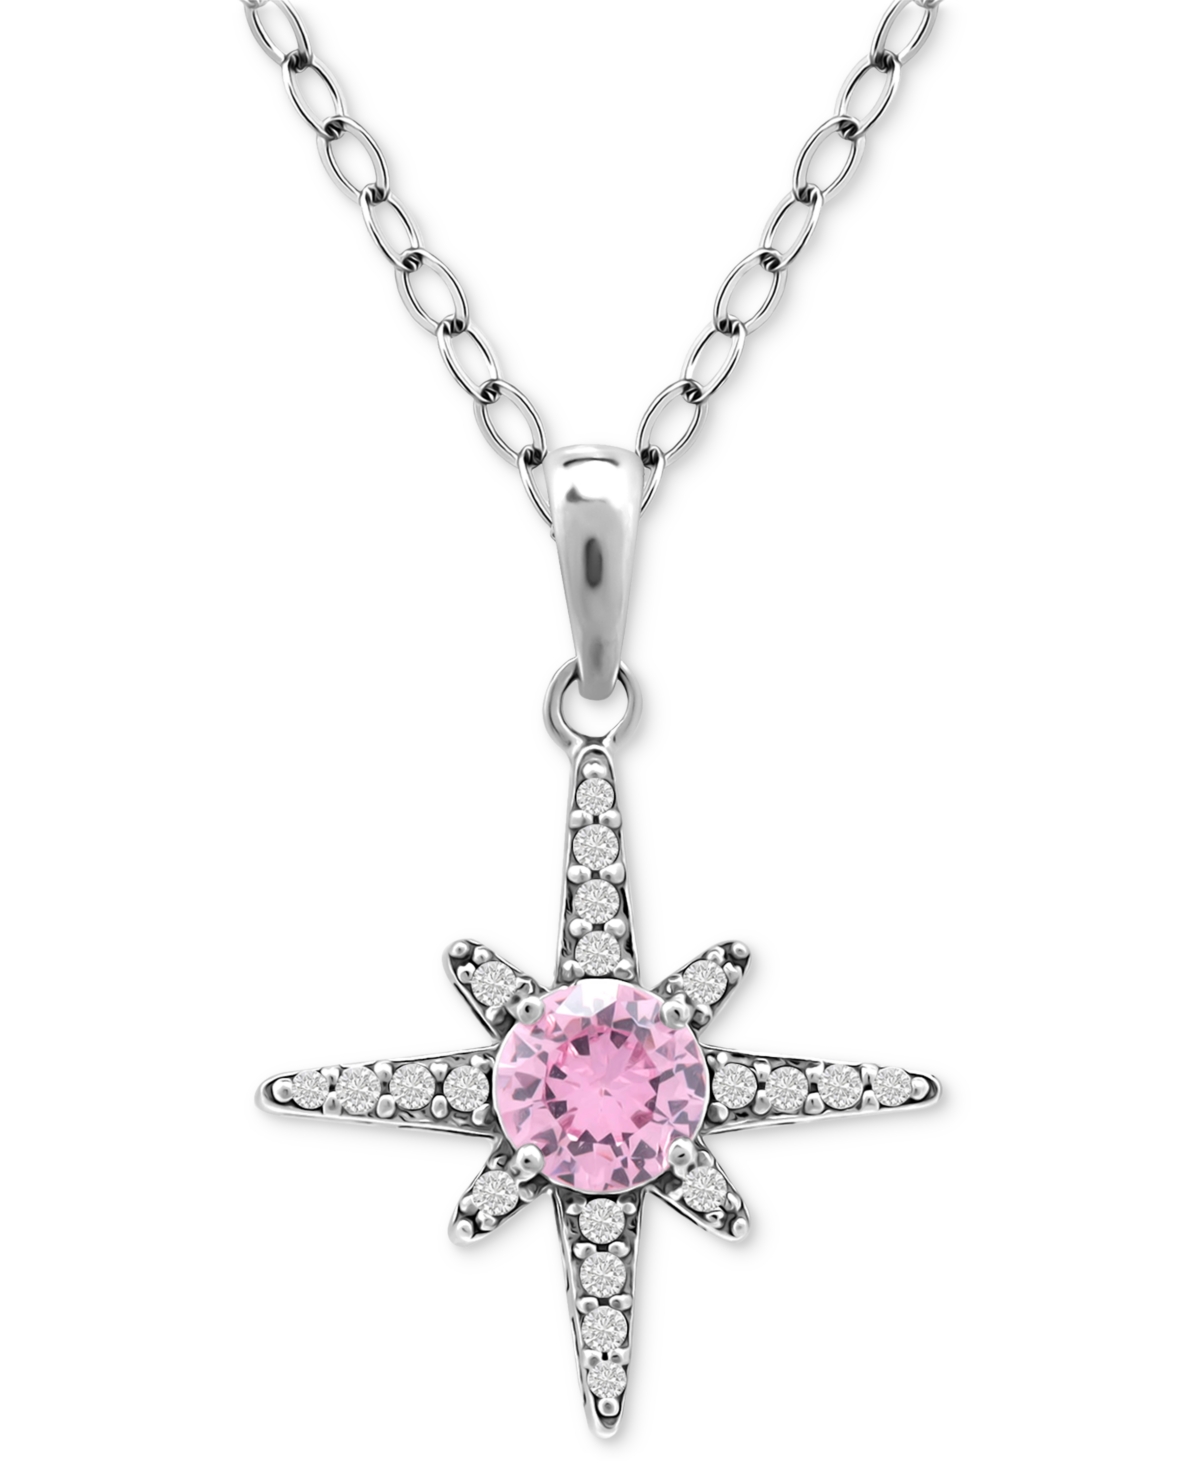 Cubic Zirconia Celestial Star Pendant Necklace in Sterling Silver, 16" + 2" extender, Created for Macy's - Pink